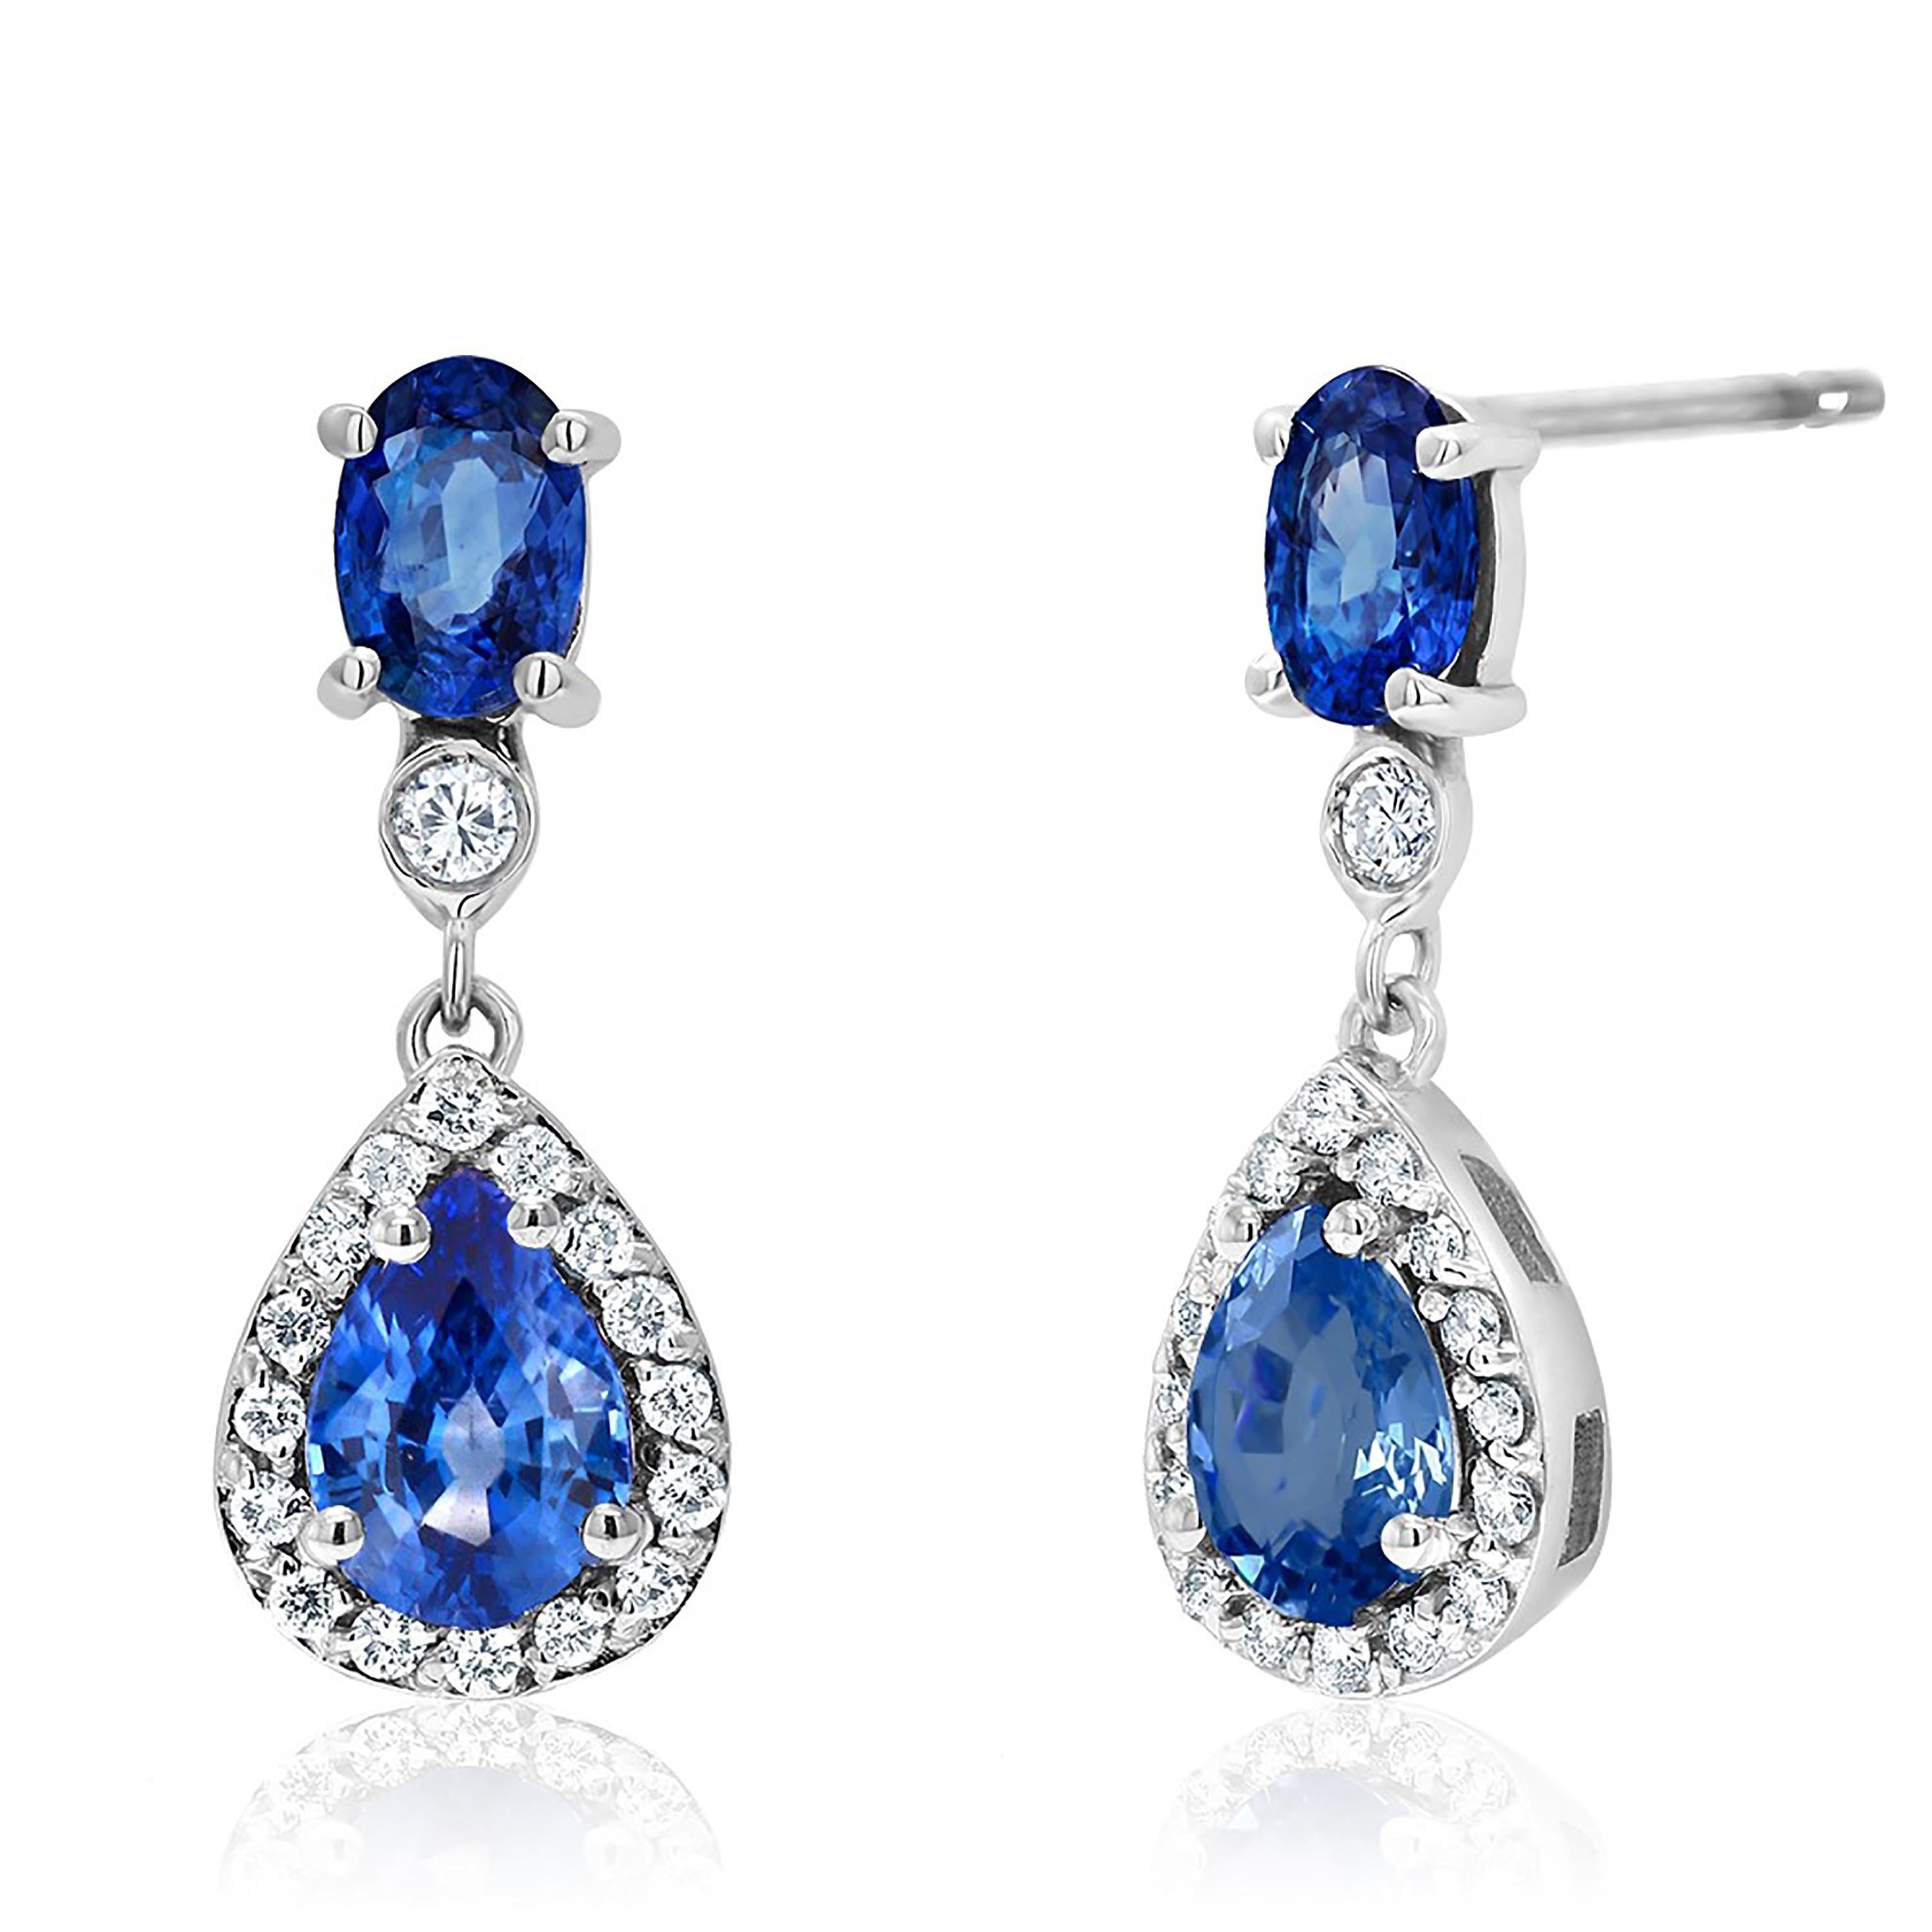 14 karat white gold drop earrings one-inch long
Diamonds weighing 0.50 carat 
Two Pear shape sapphires weighing 1.75 carat
Two oval sapphires weighing 1.20 carat
One of a kind earring
New Earrings
Handmade in the USA
The 14 karat gold earrings are